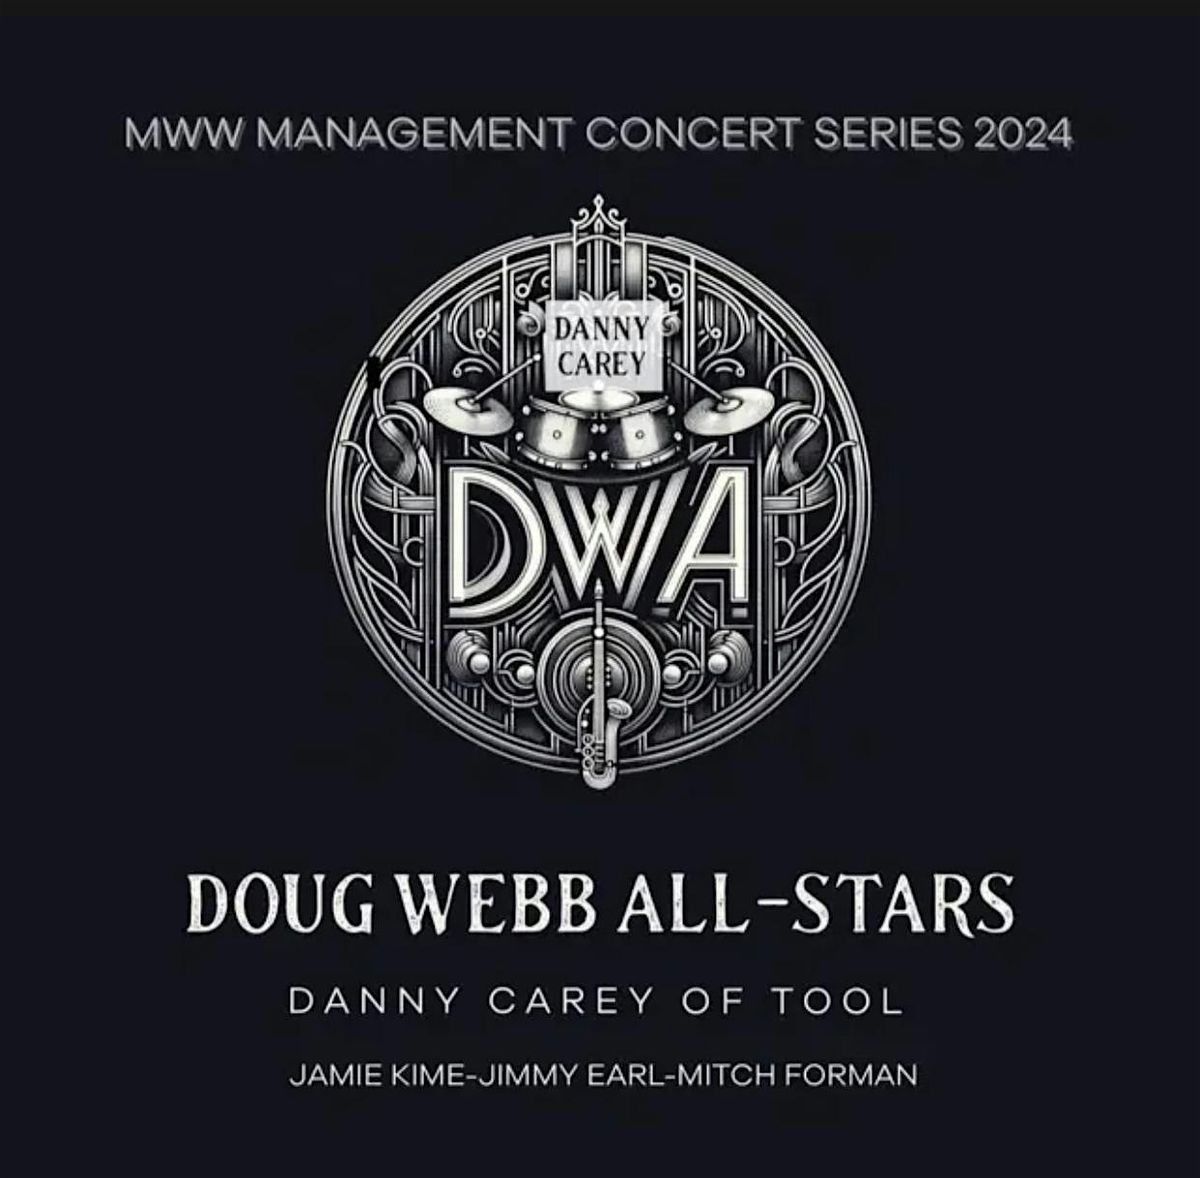 MWW MANAGEMENT PRESENTS DWA FEATURING DANNY CAREY OF TOOL AUG 2 & 3